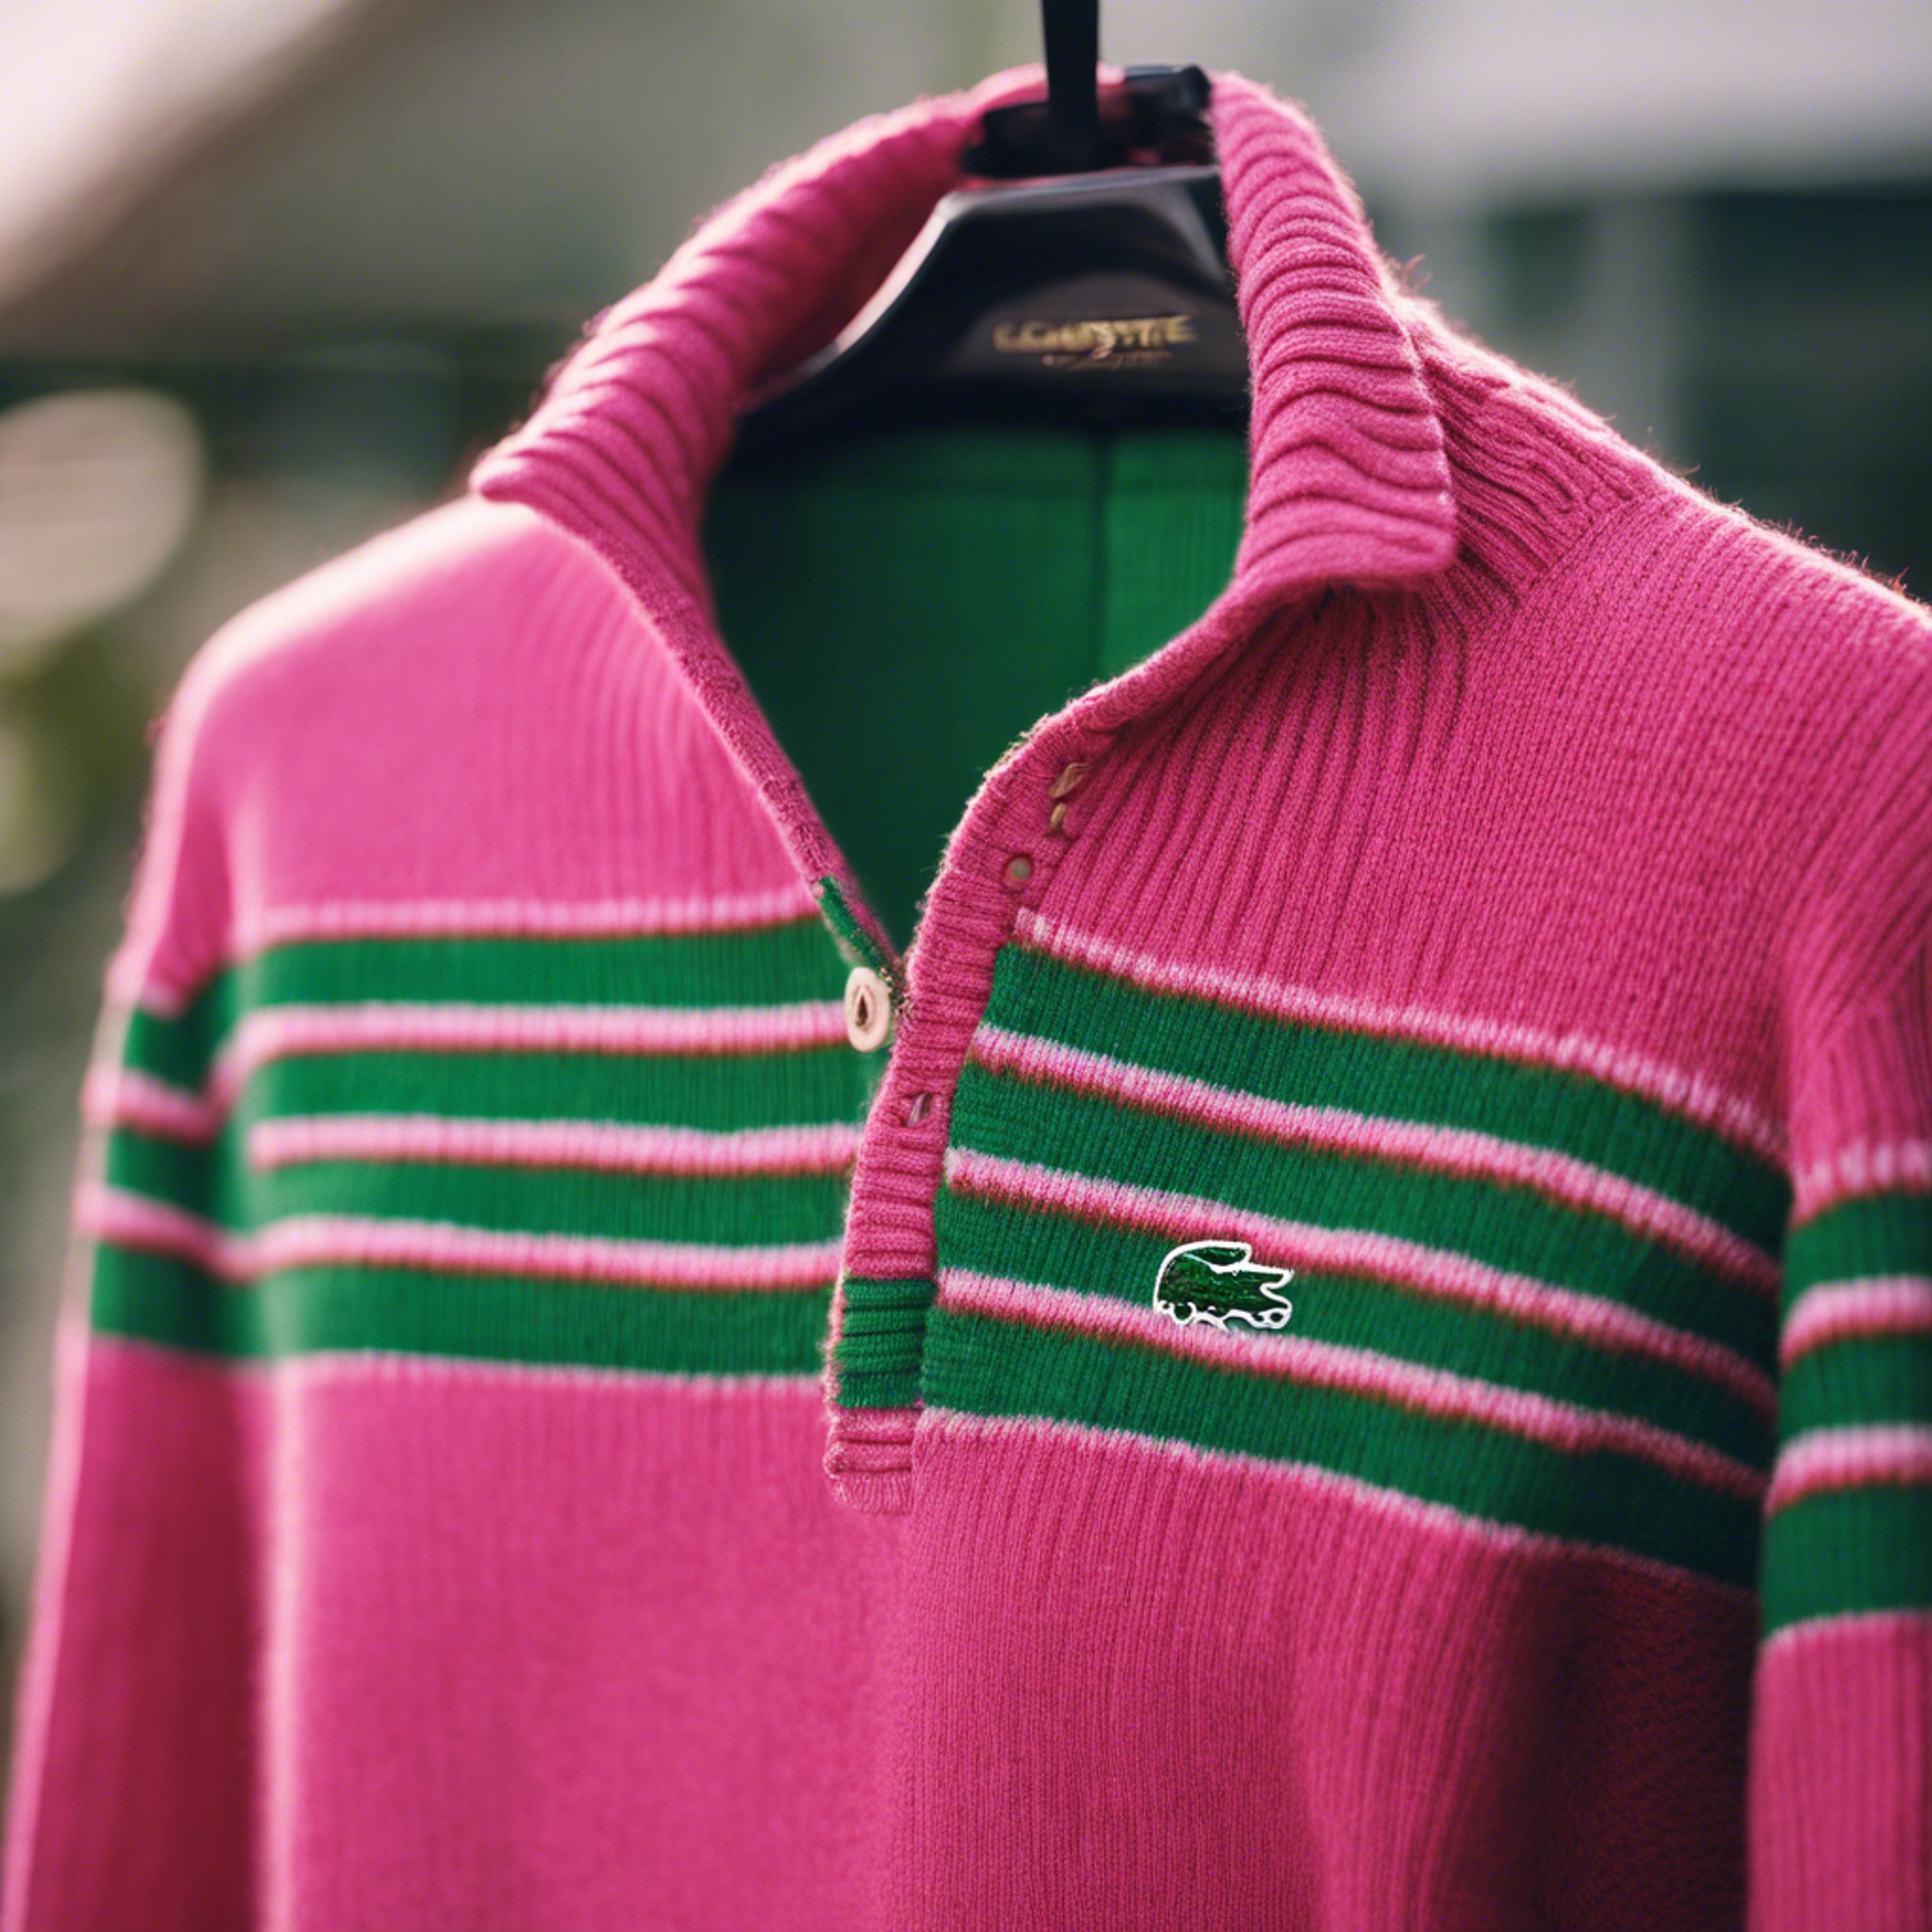 A preppy Lacoste sweater in bright pink and green stripes. Taustakuva[46dc671cf42d4e658ddb]